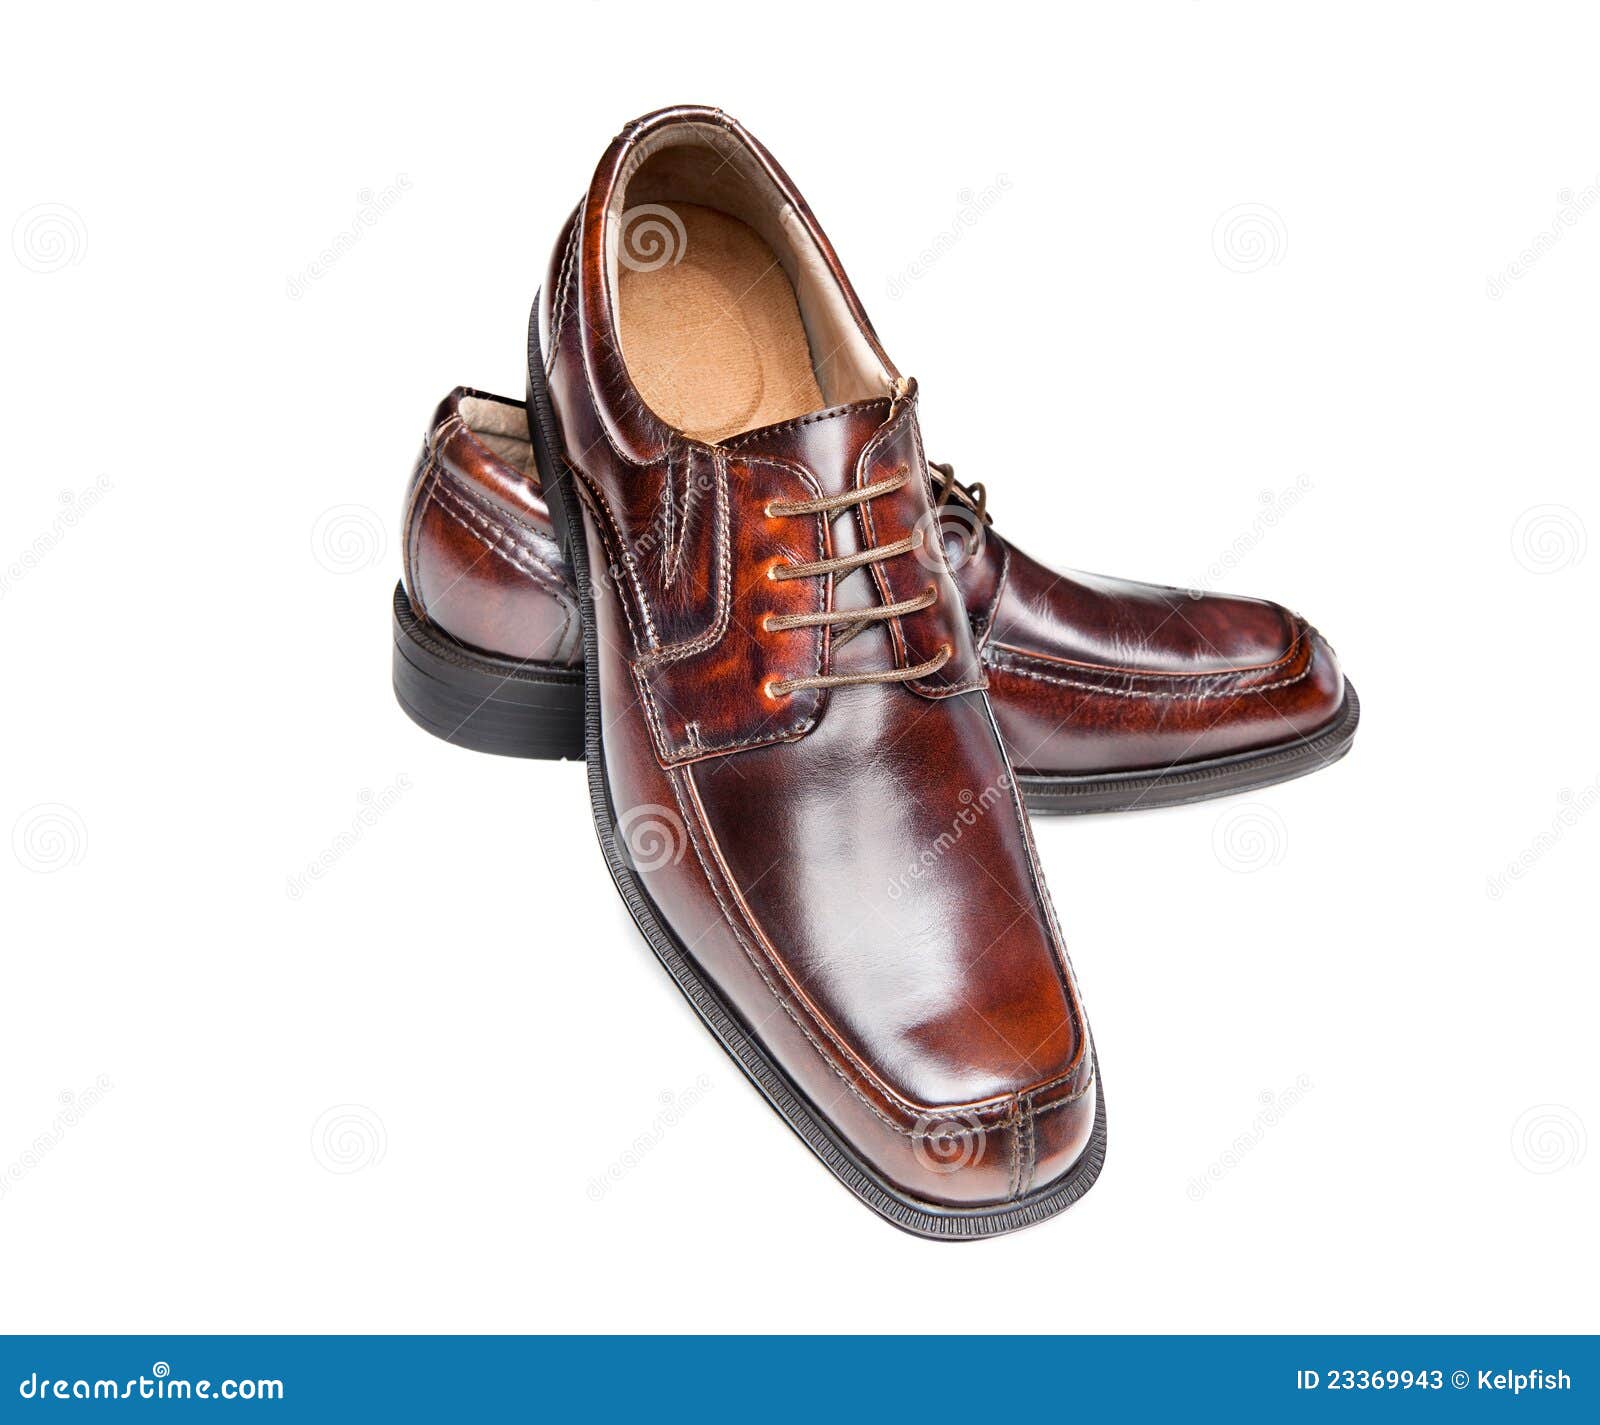 Brown leather shoes stock image. Image of mens, formal - 23369943